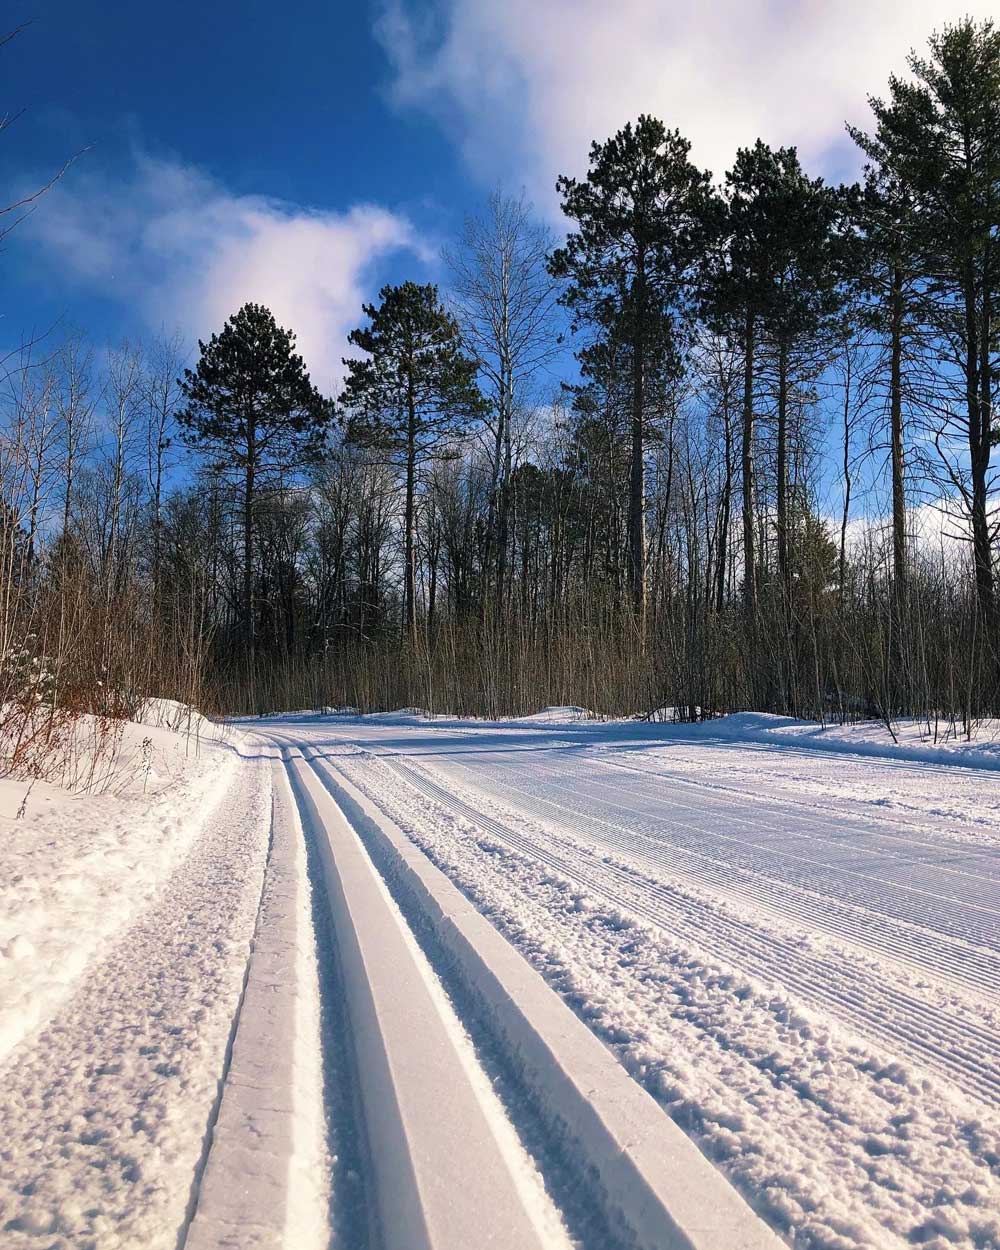 Perfect cross country ski conditions on the trail